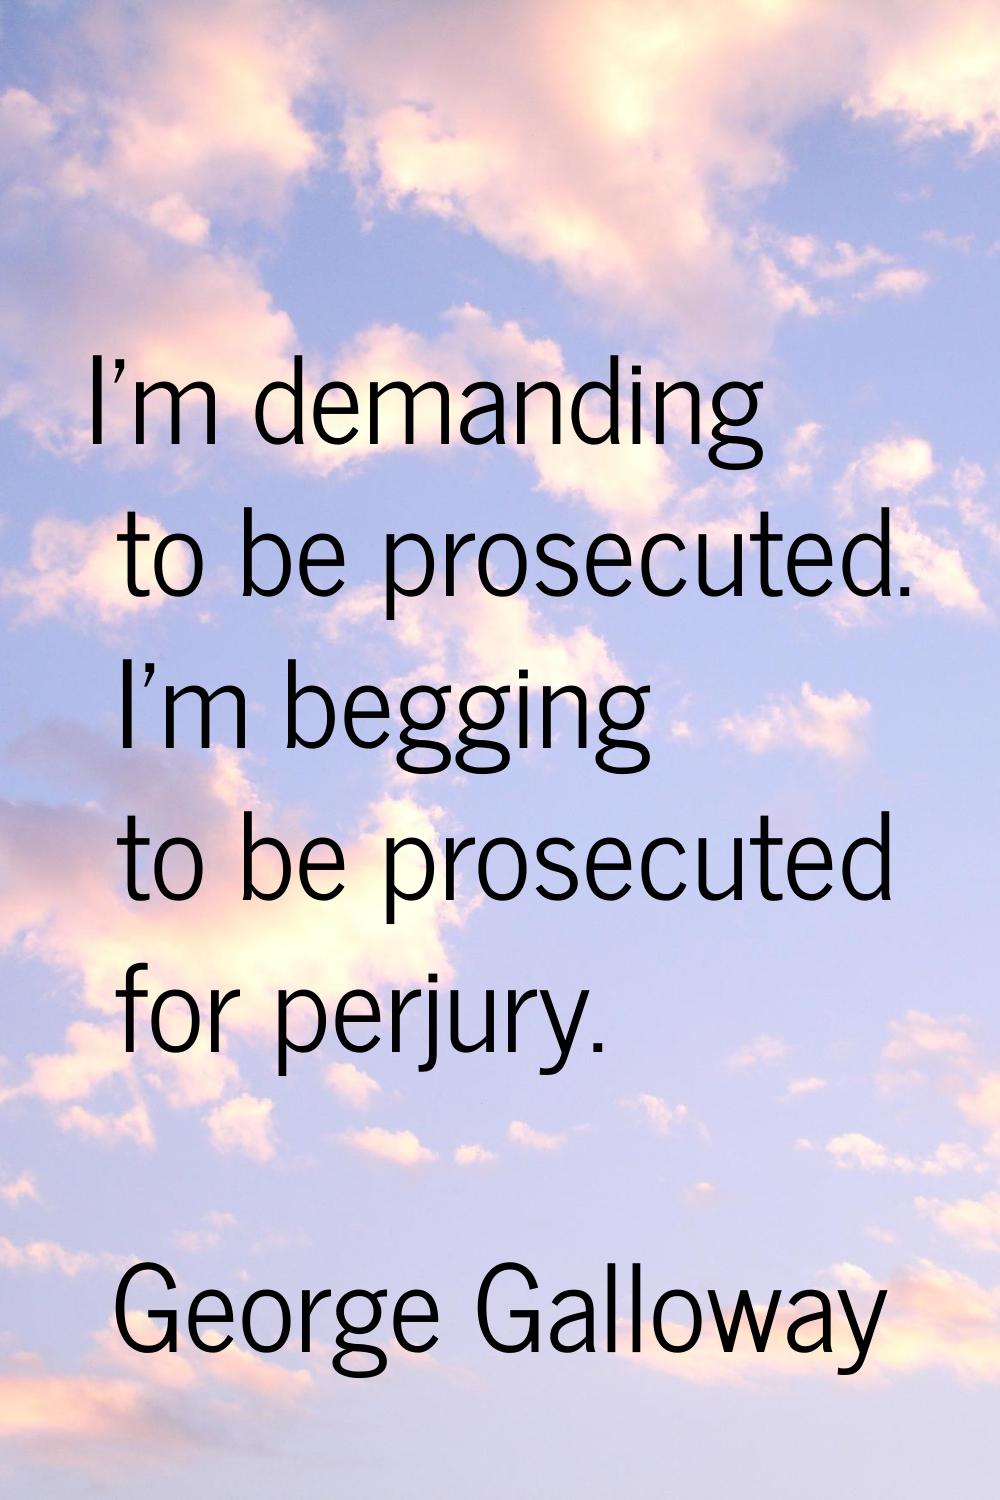 I'm demanding to be prosecuted. I'm begging to be prosecuted for perjury.